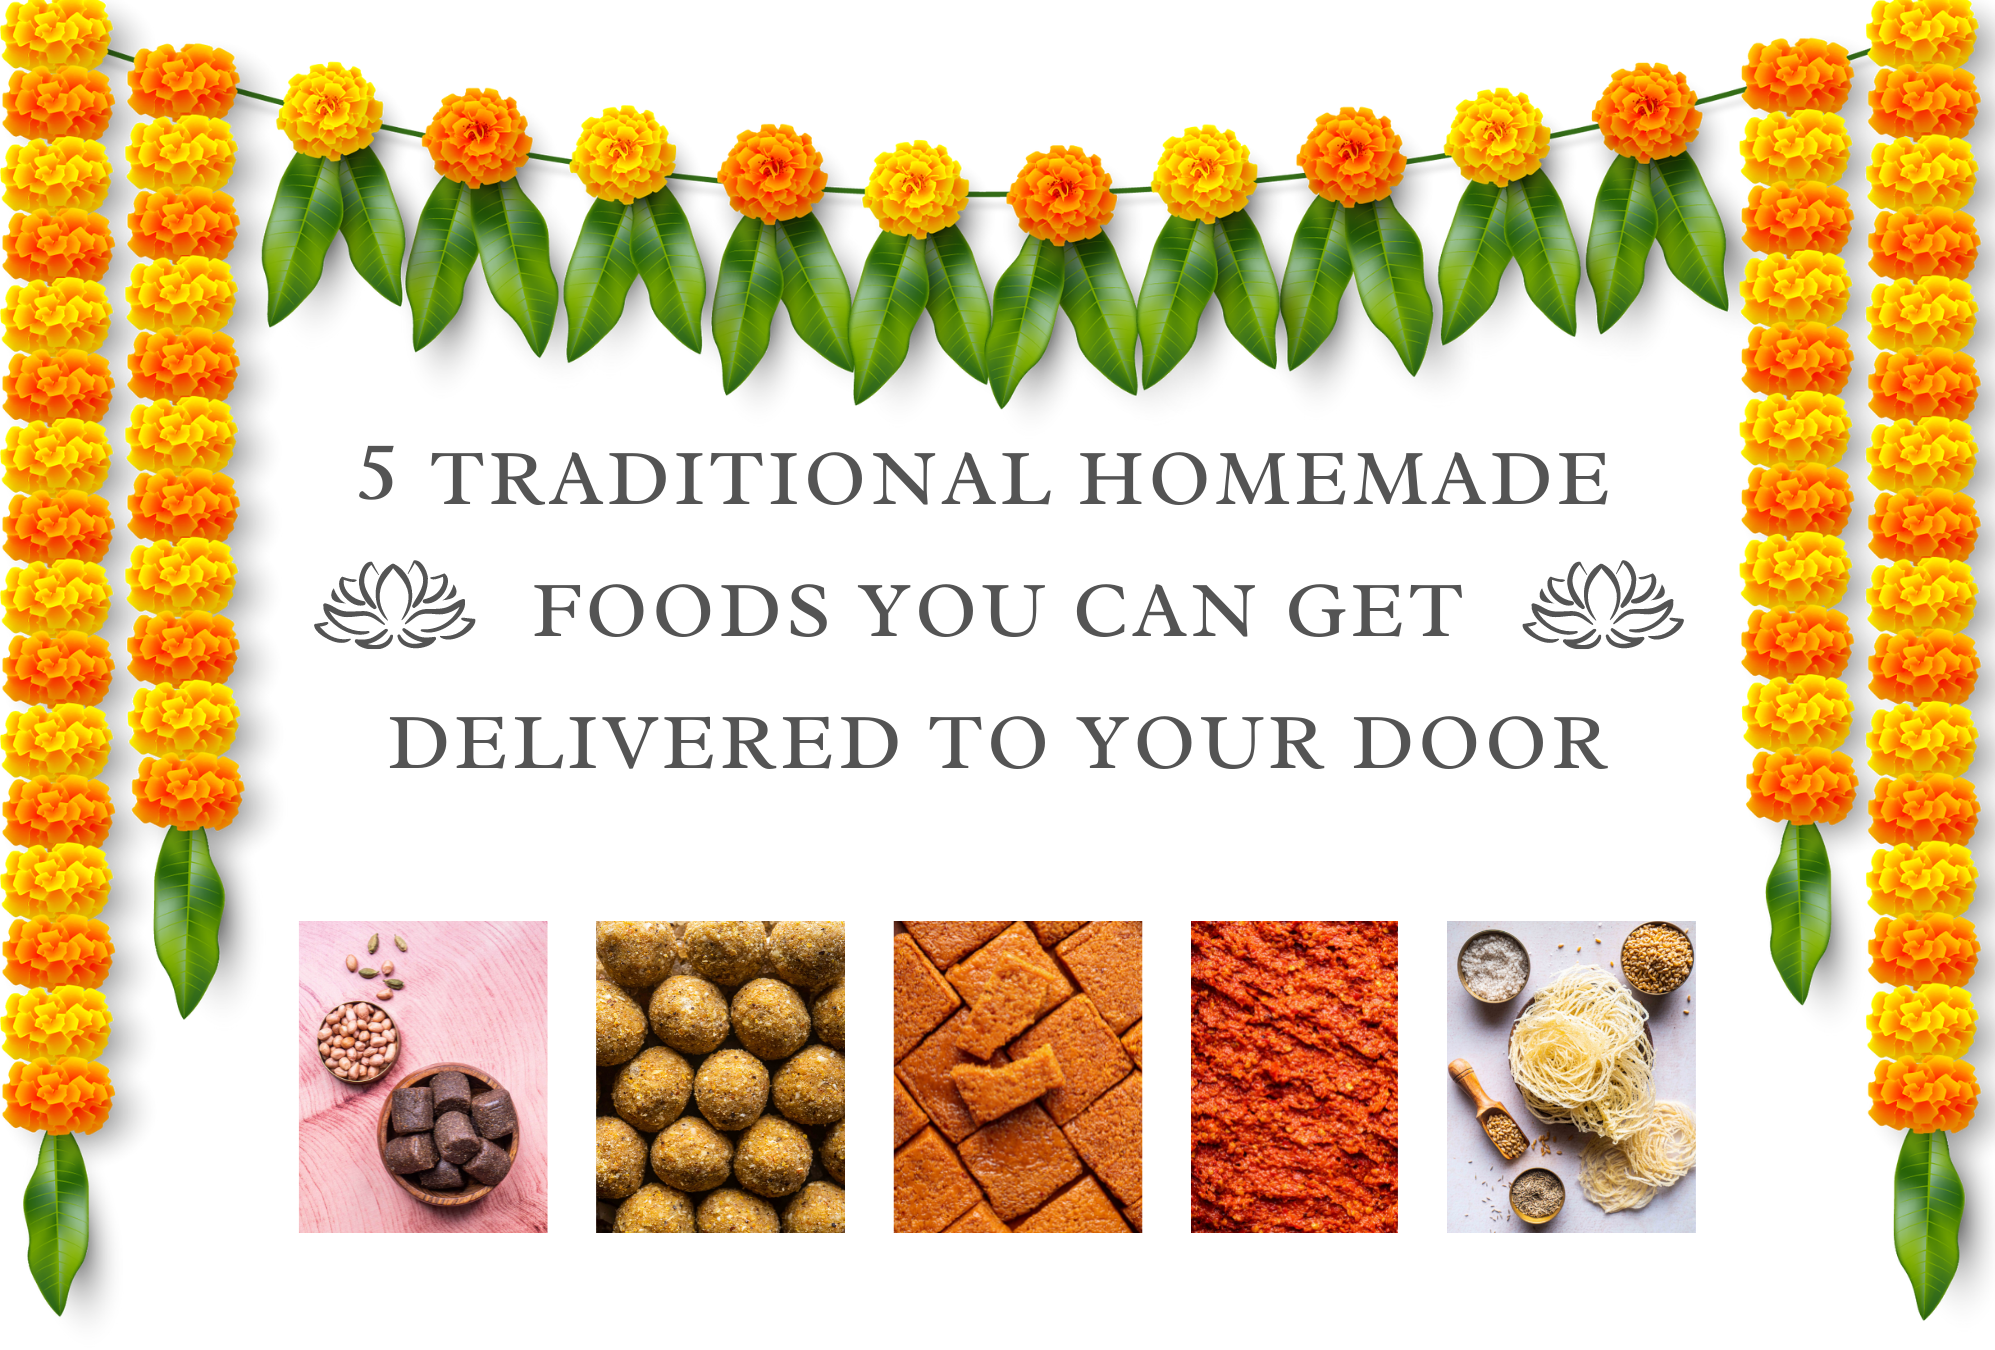 5 Traditional Home Made Foods You Can Get Delivered To Your Door